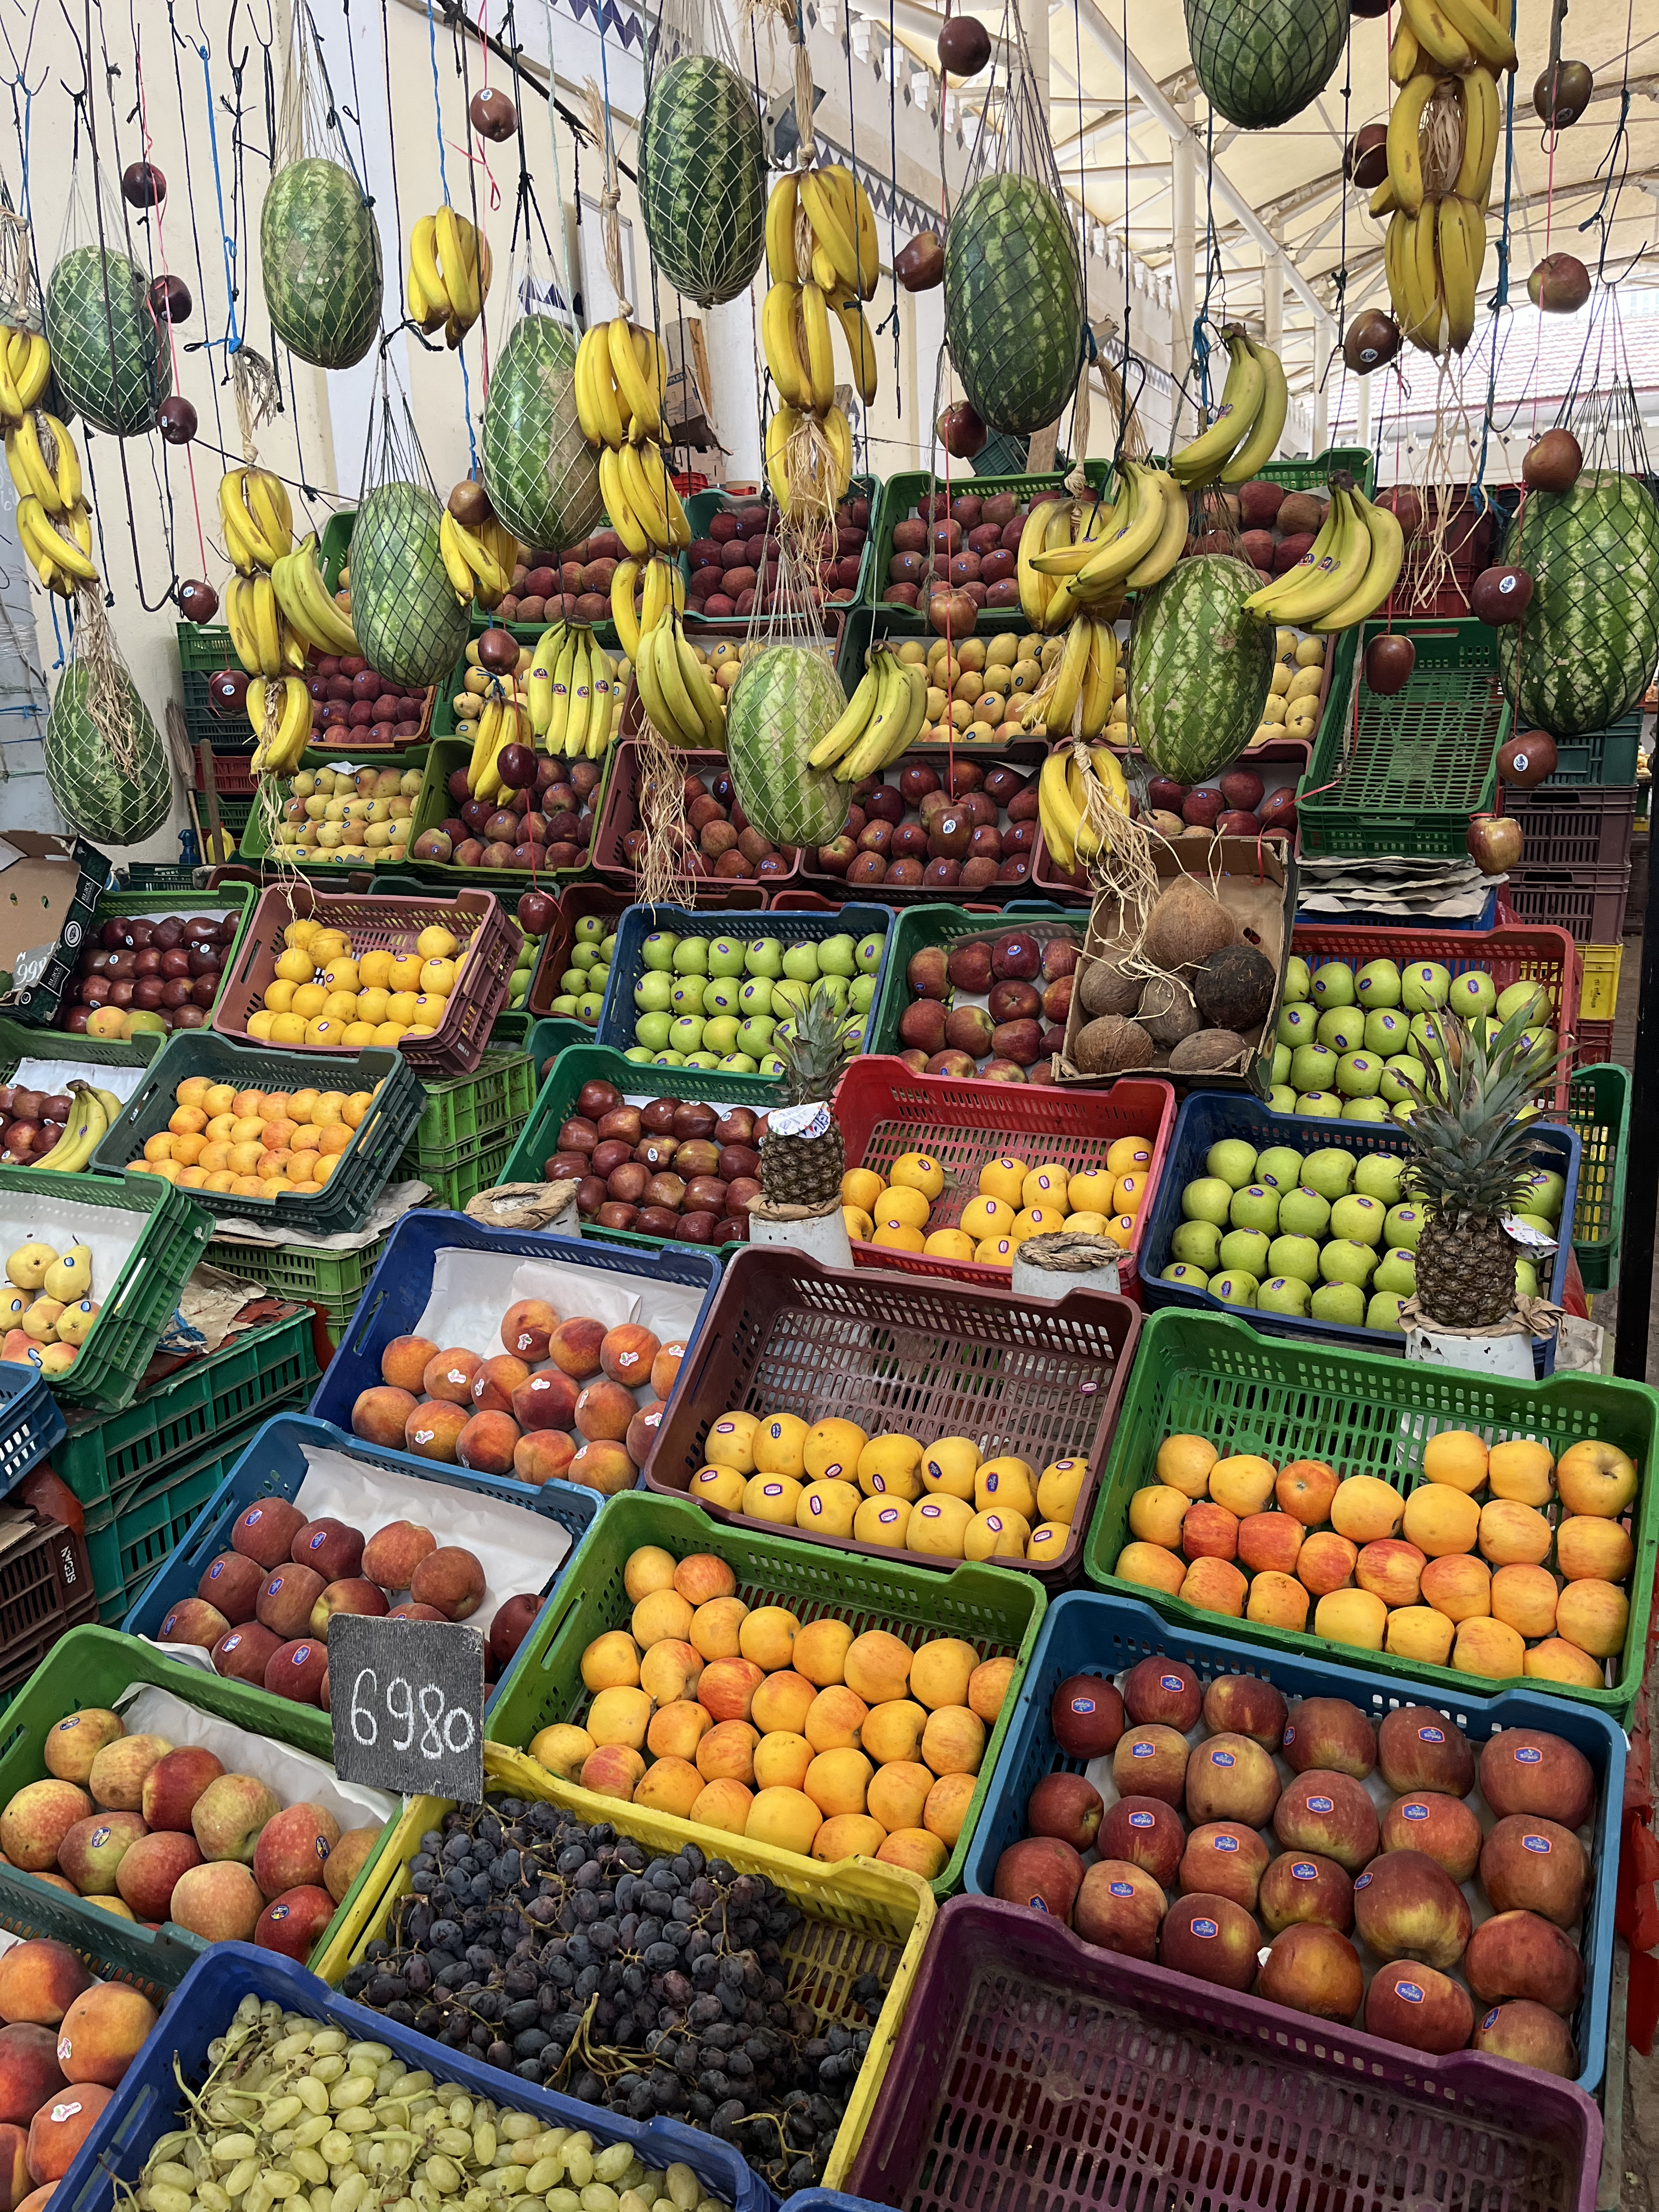 A fruit stand with variety of fruits